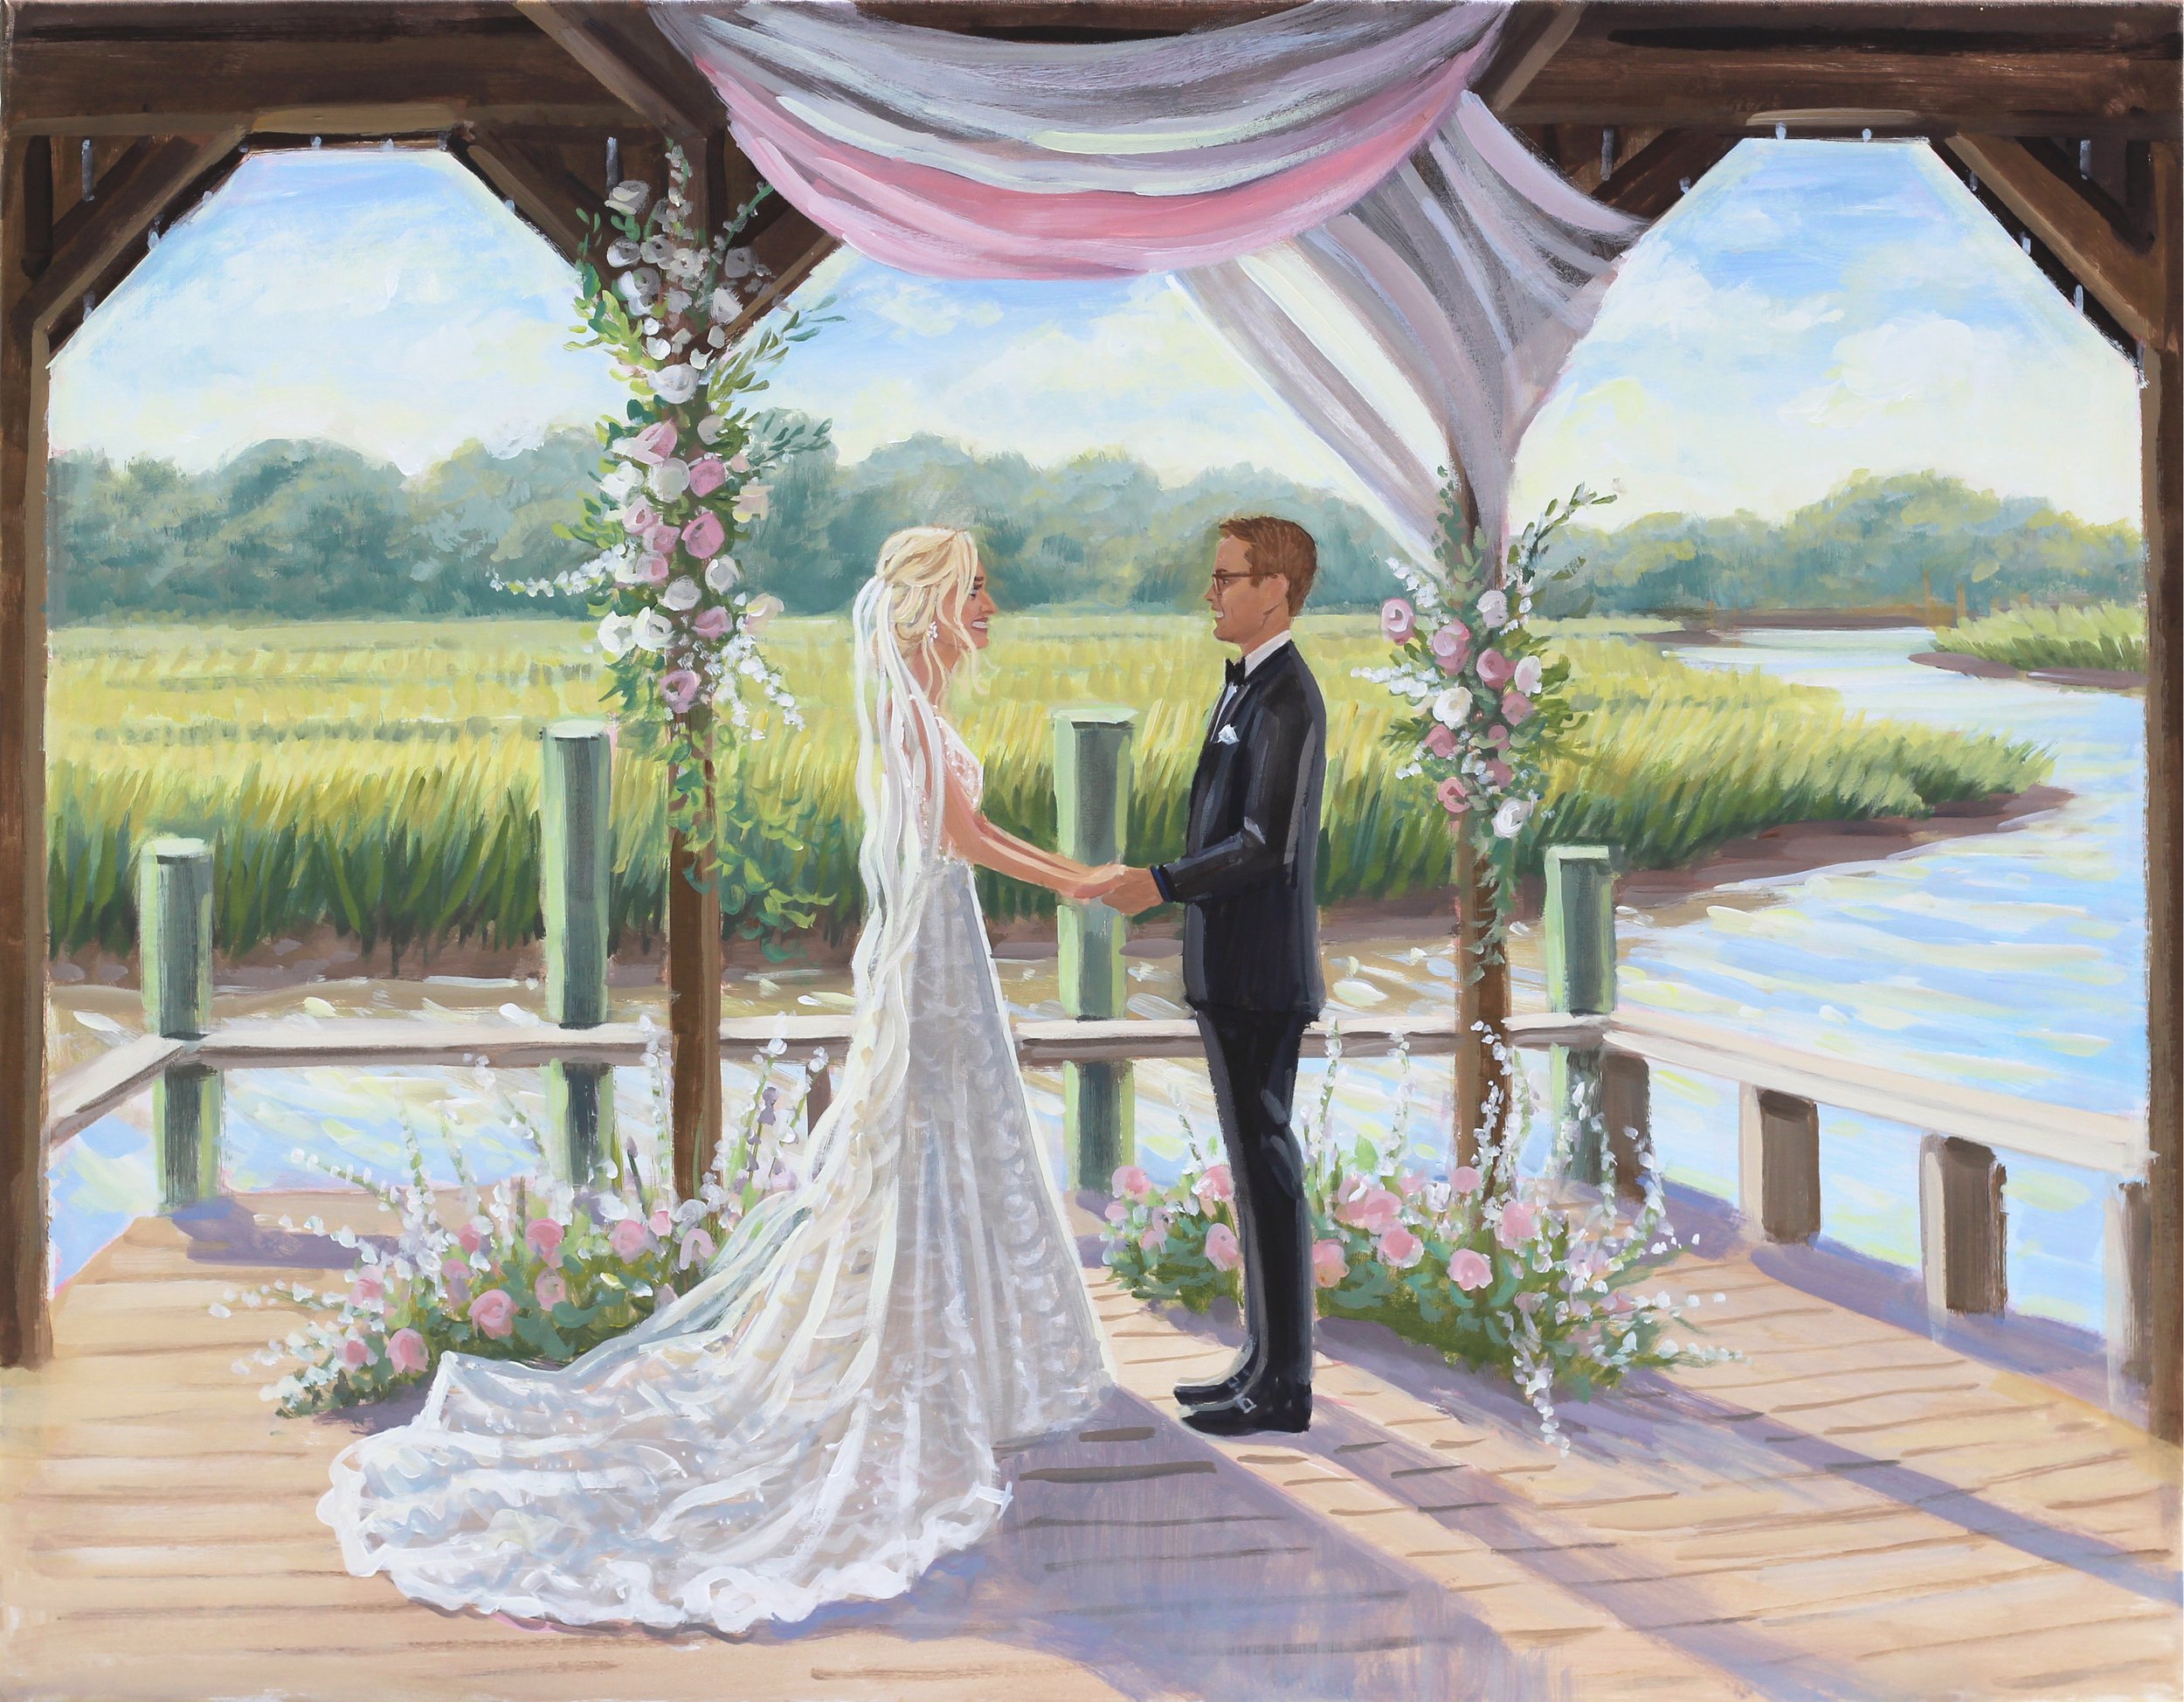 Live Wedding Painting at Boone Hall on Cotton Dock